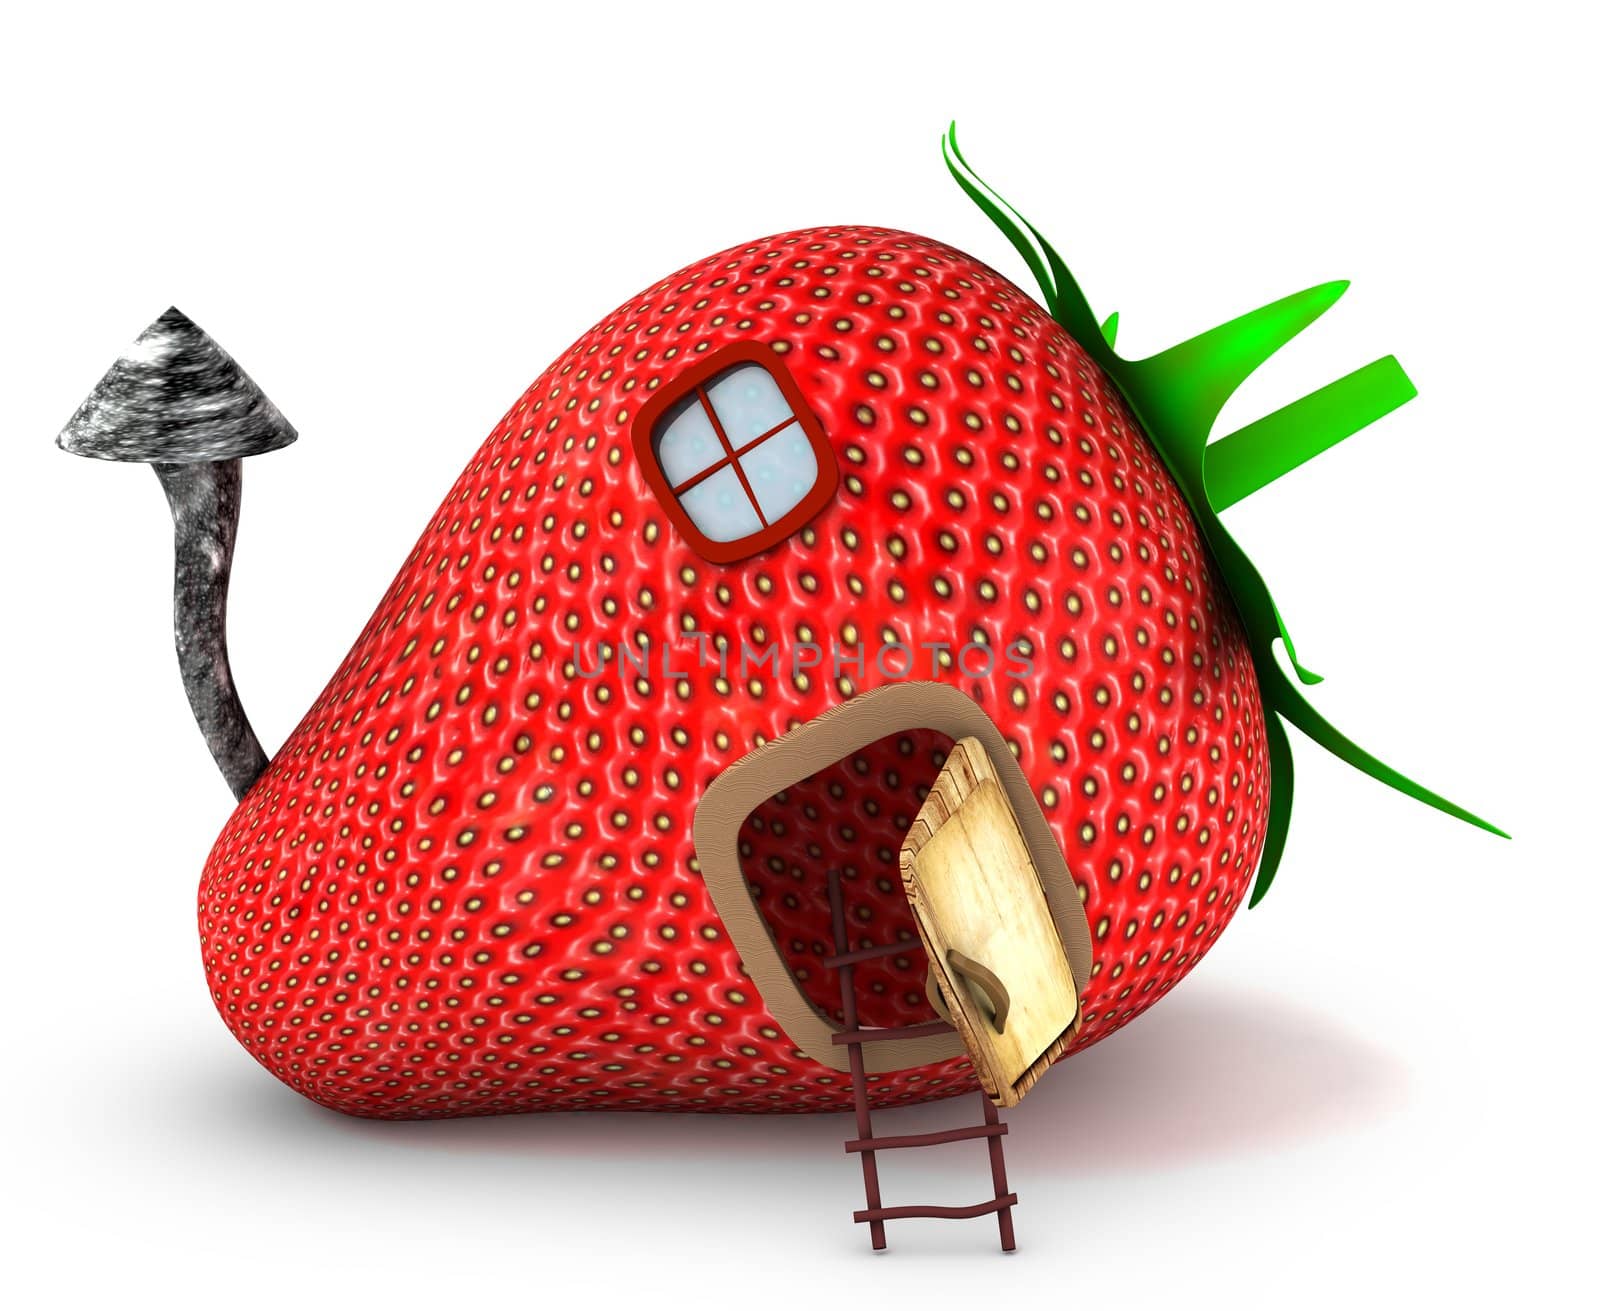 Strawberry house 3d rendered for commercial and web